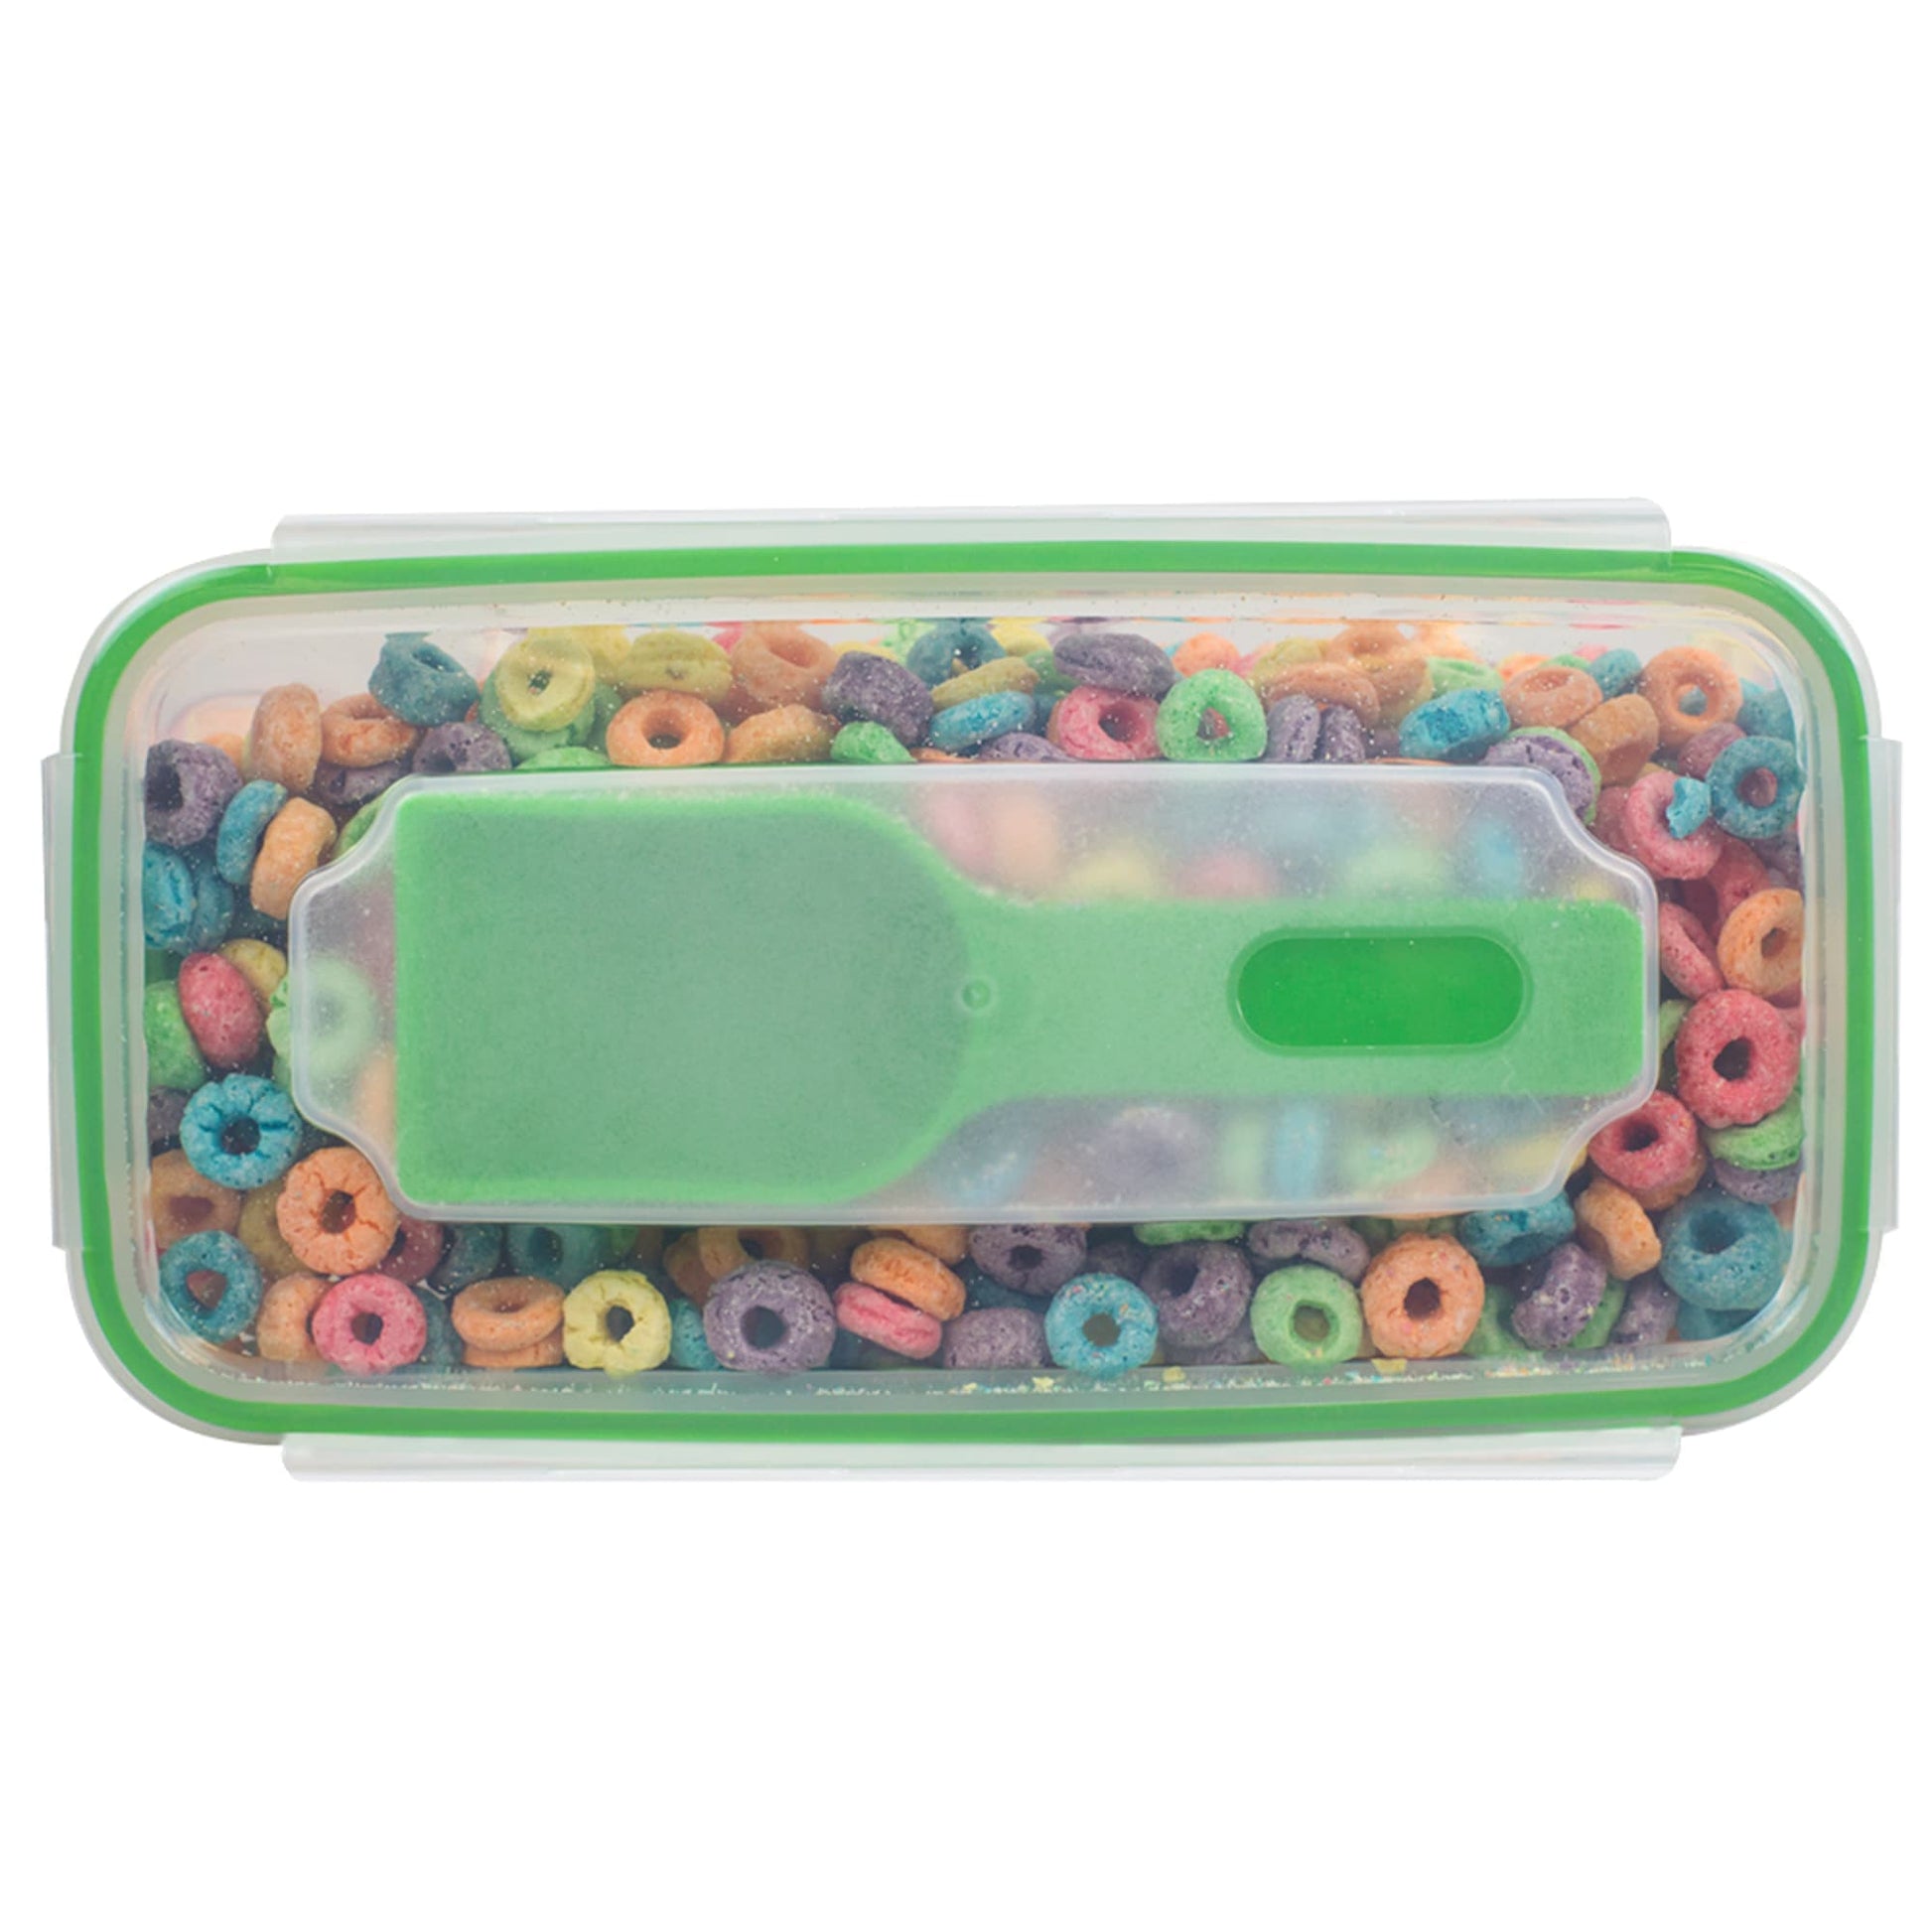 Home Basics 4-Sided Locking Plastic Cereal Storage Container with Spoon, Seafoam Green